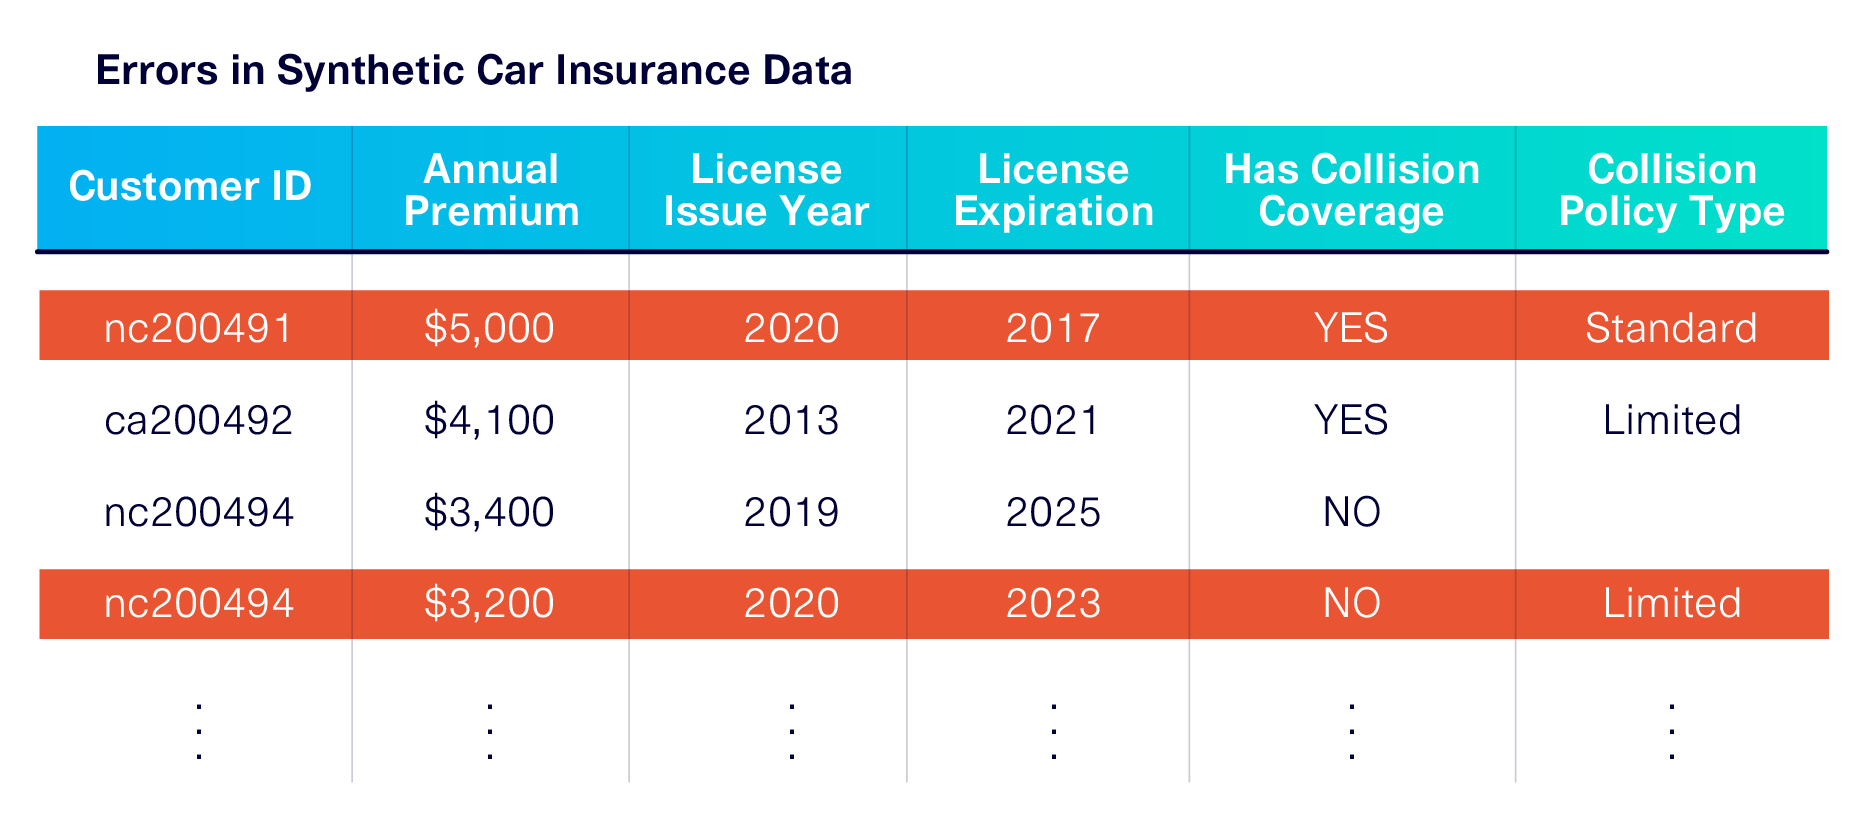 The synthetic car insurance data, with errors highlighted. 